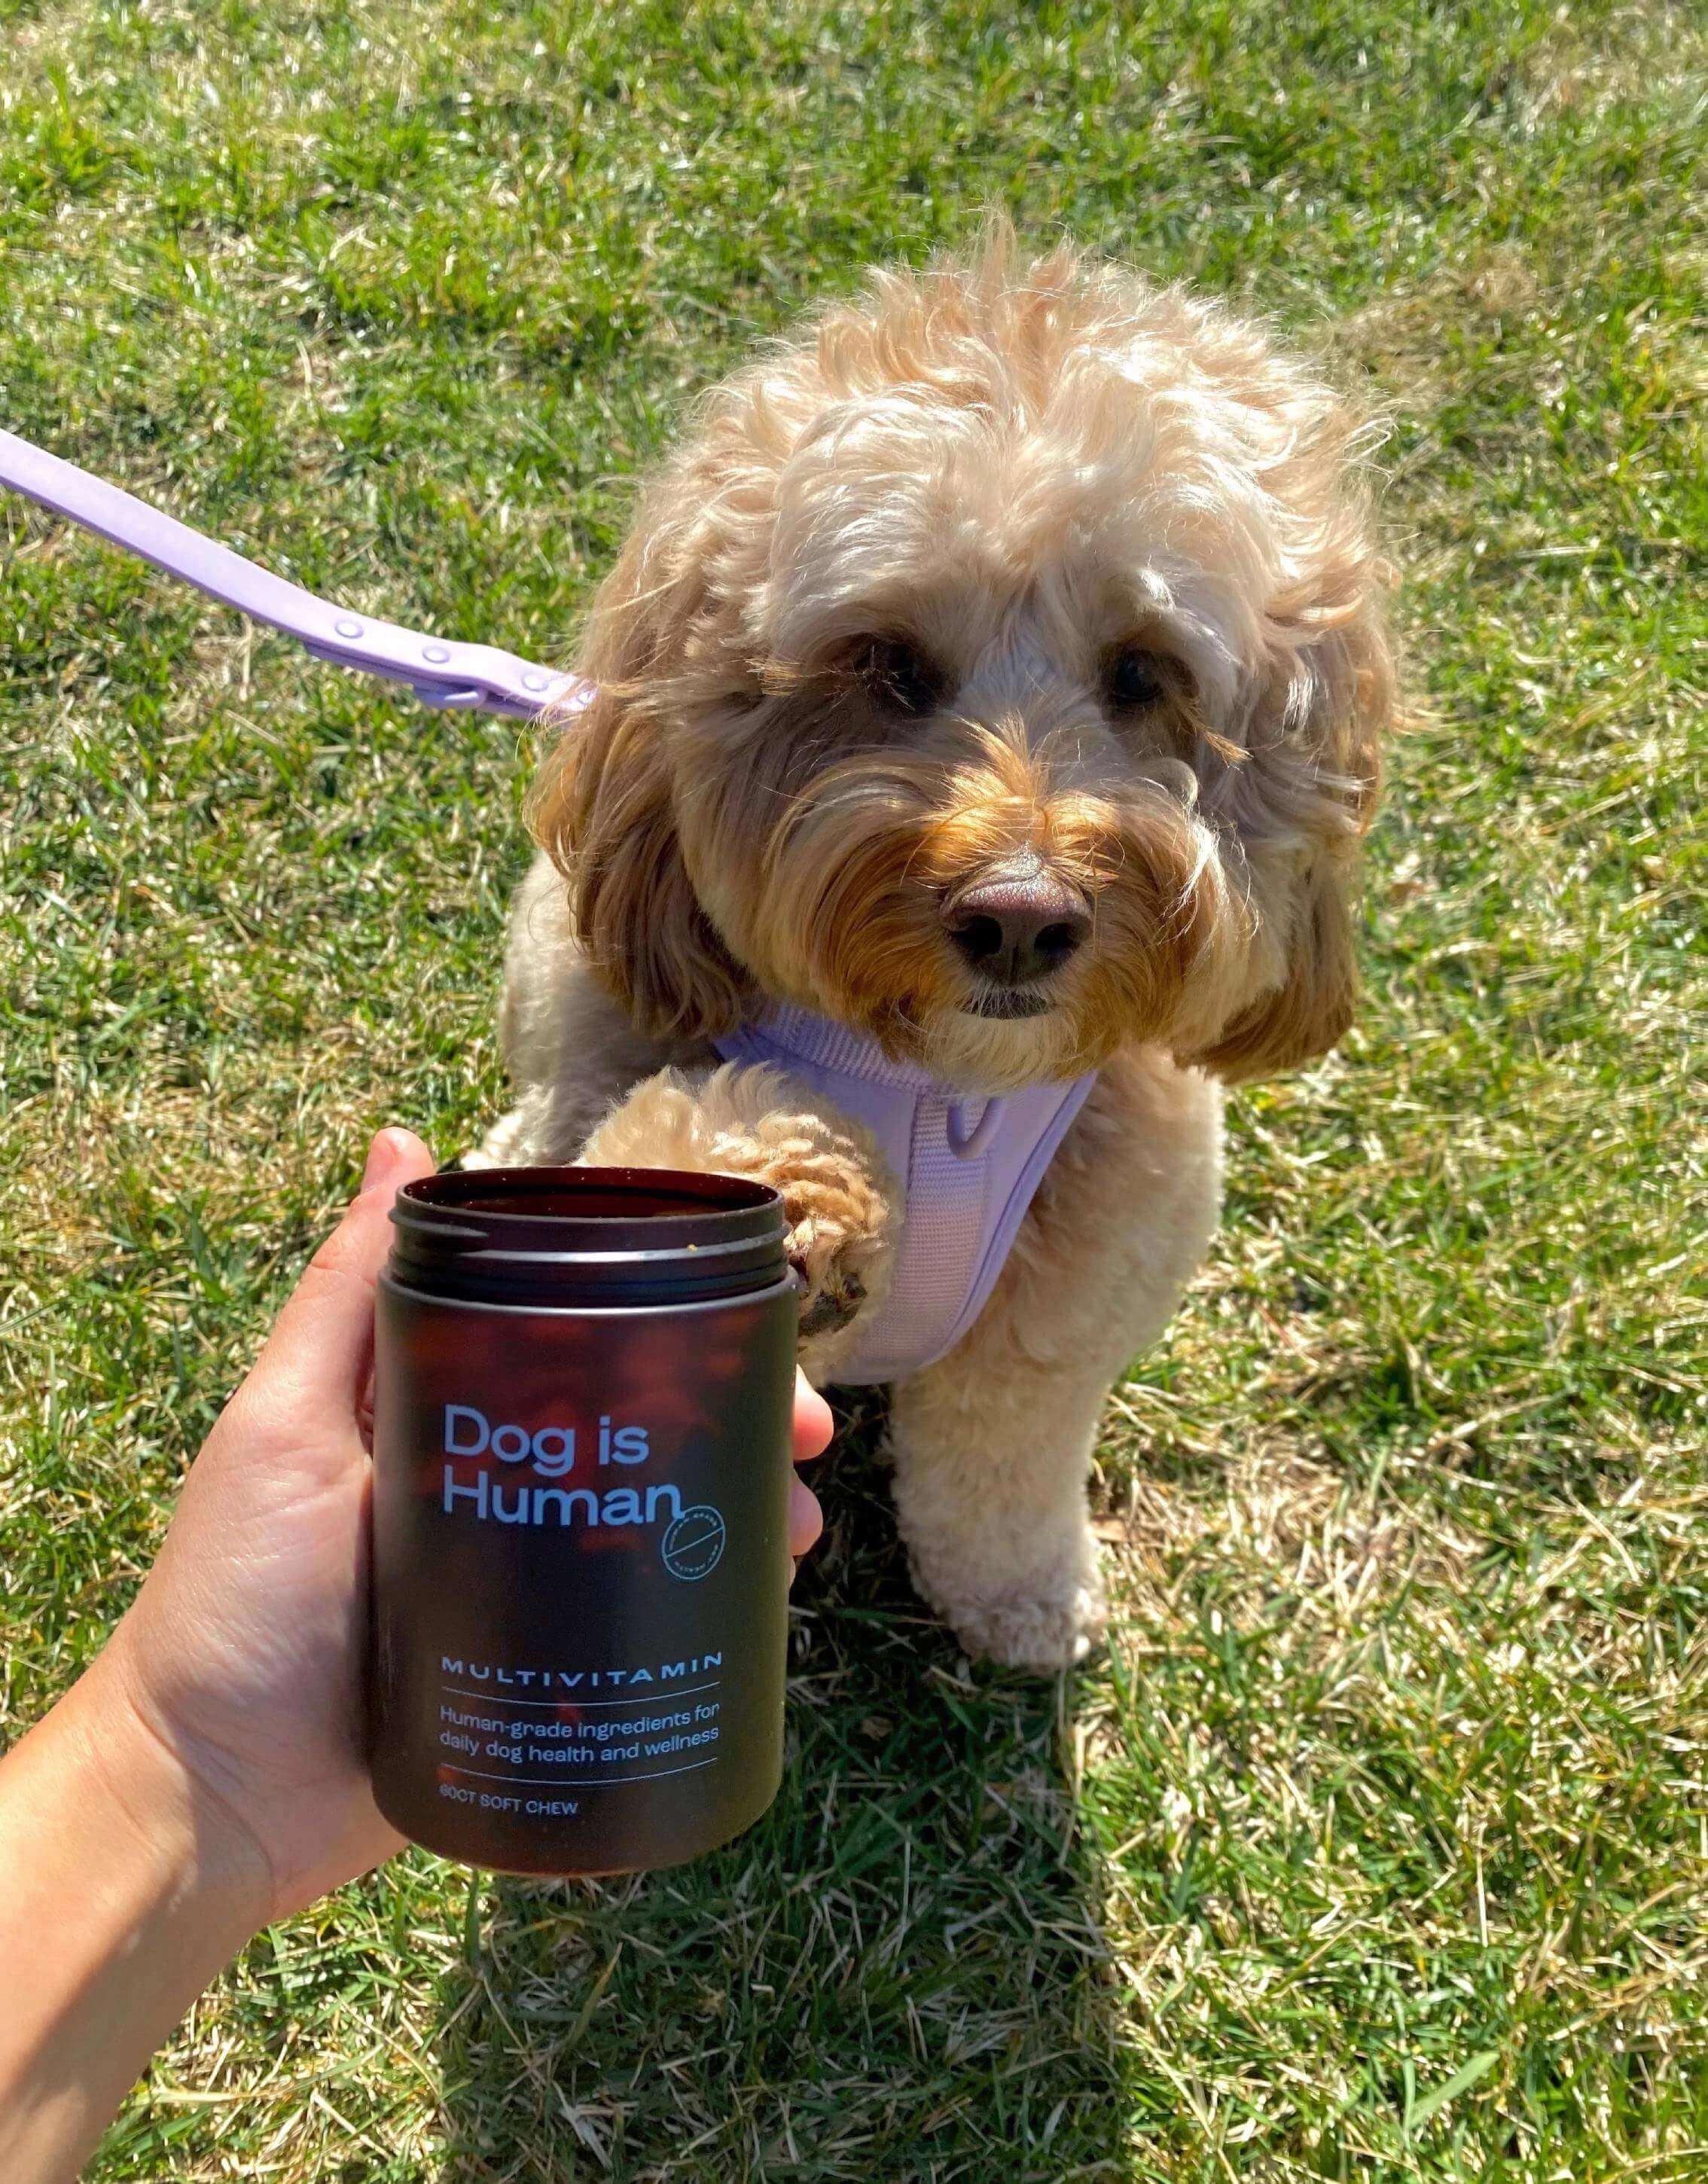 A Cockapoo sitting on grass reaching towards a jar of dog multivitamins held by its owner.